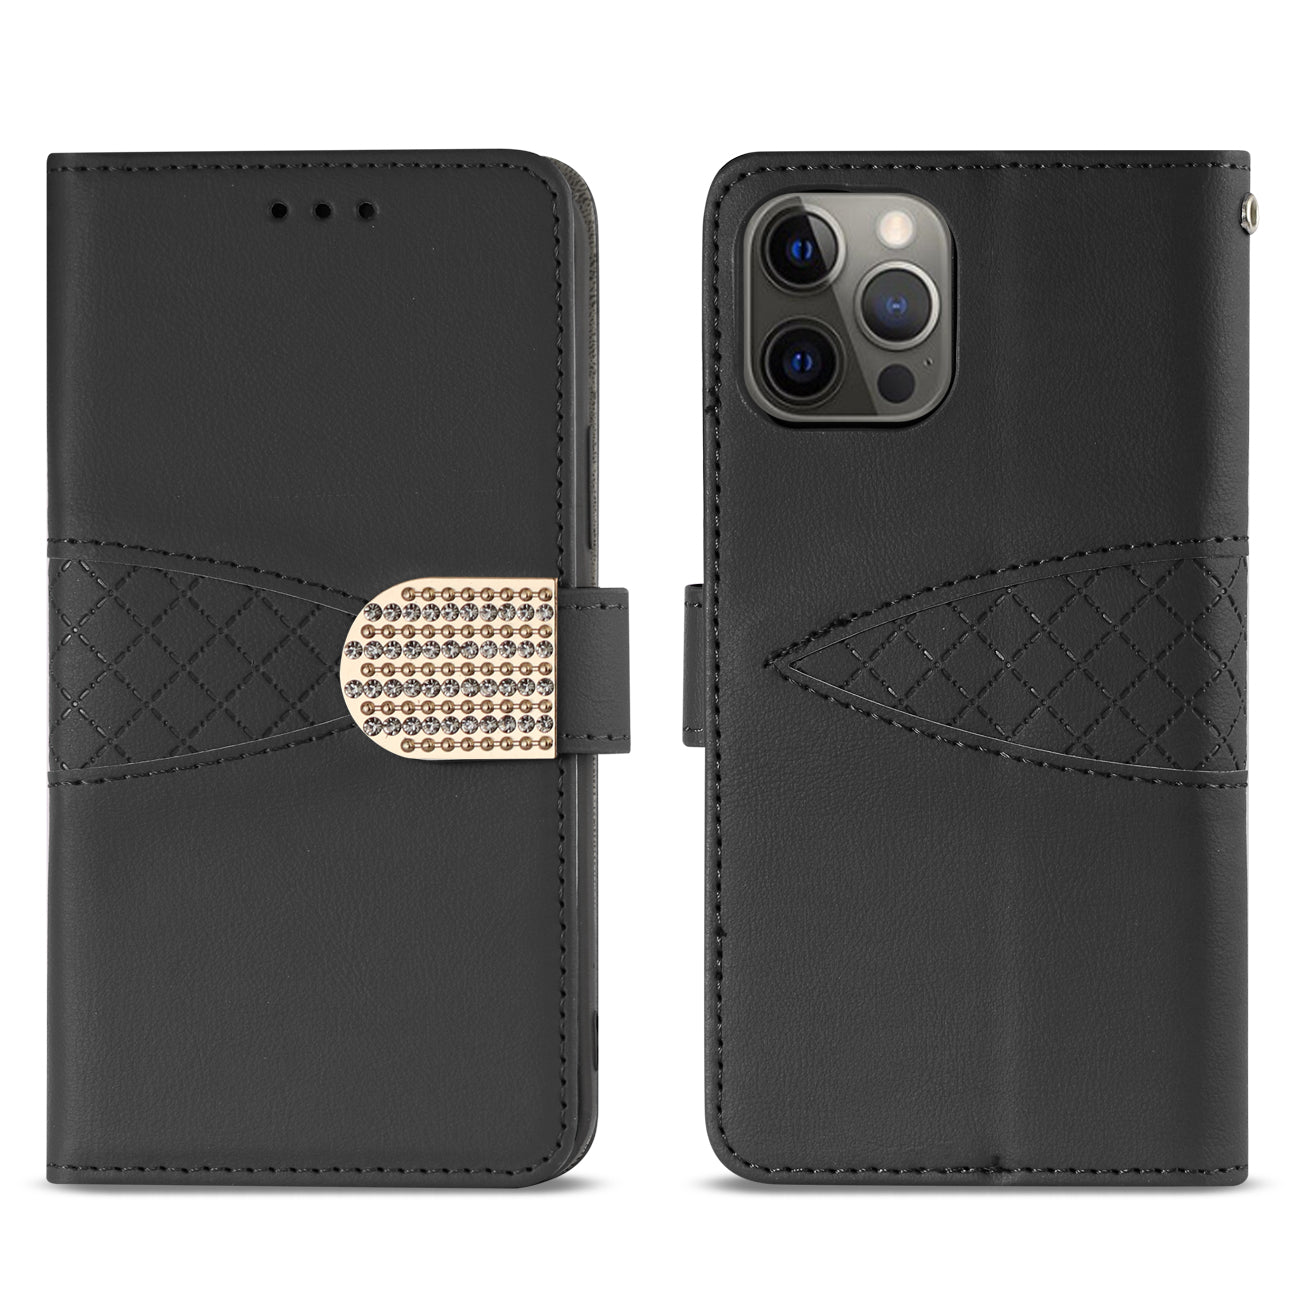 Reiko 3-In-1 Wallet Case for IPHONE 12/ IPHONE 12 PRO In Black